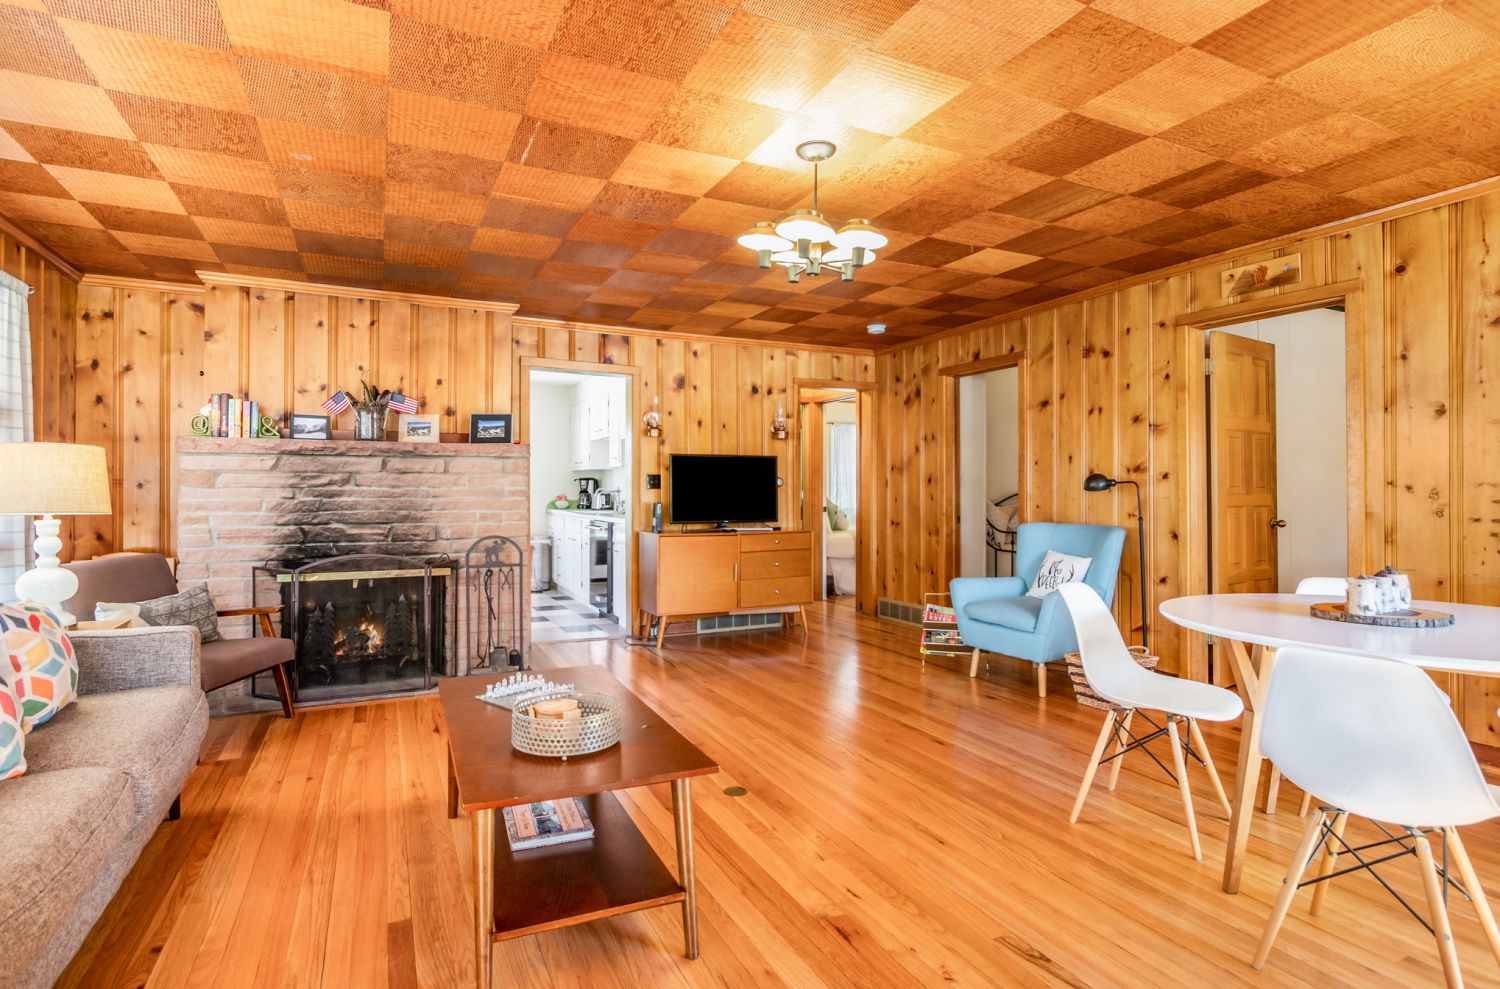 The Dunraven Retreat - Living room with a wood burning fireplace and flat screen TV (guest buys firewood)